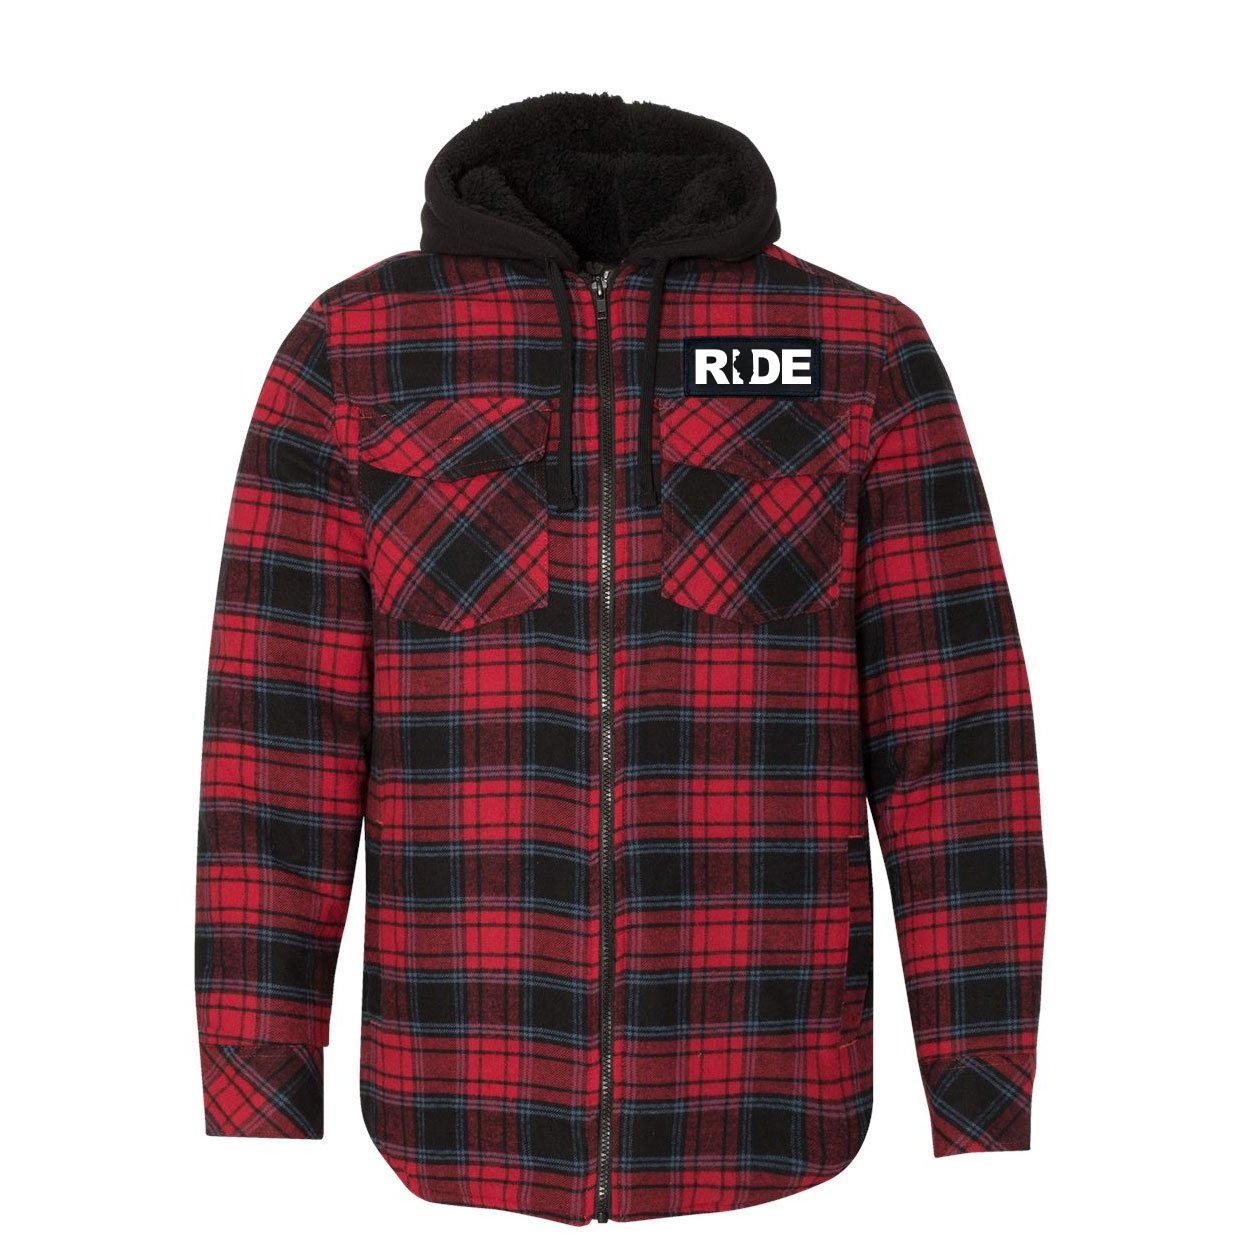 Ride Illinois Classic Unisex Full Zip Woven Patch Hooded Flannel Jacket Red/Black Buffalo (White Logo)